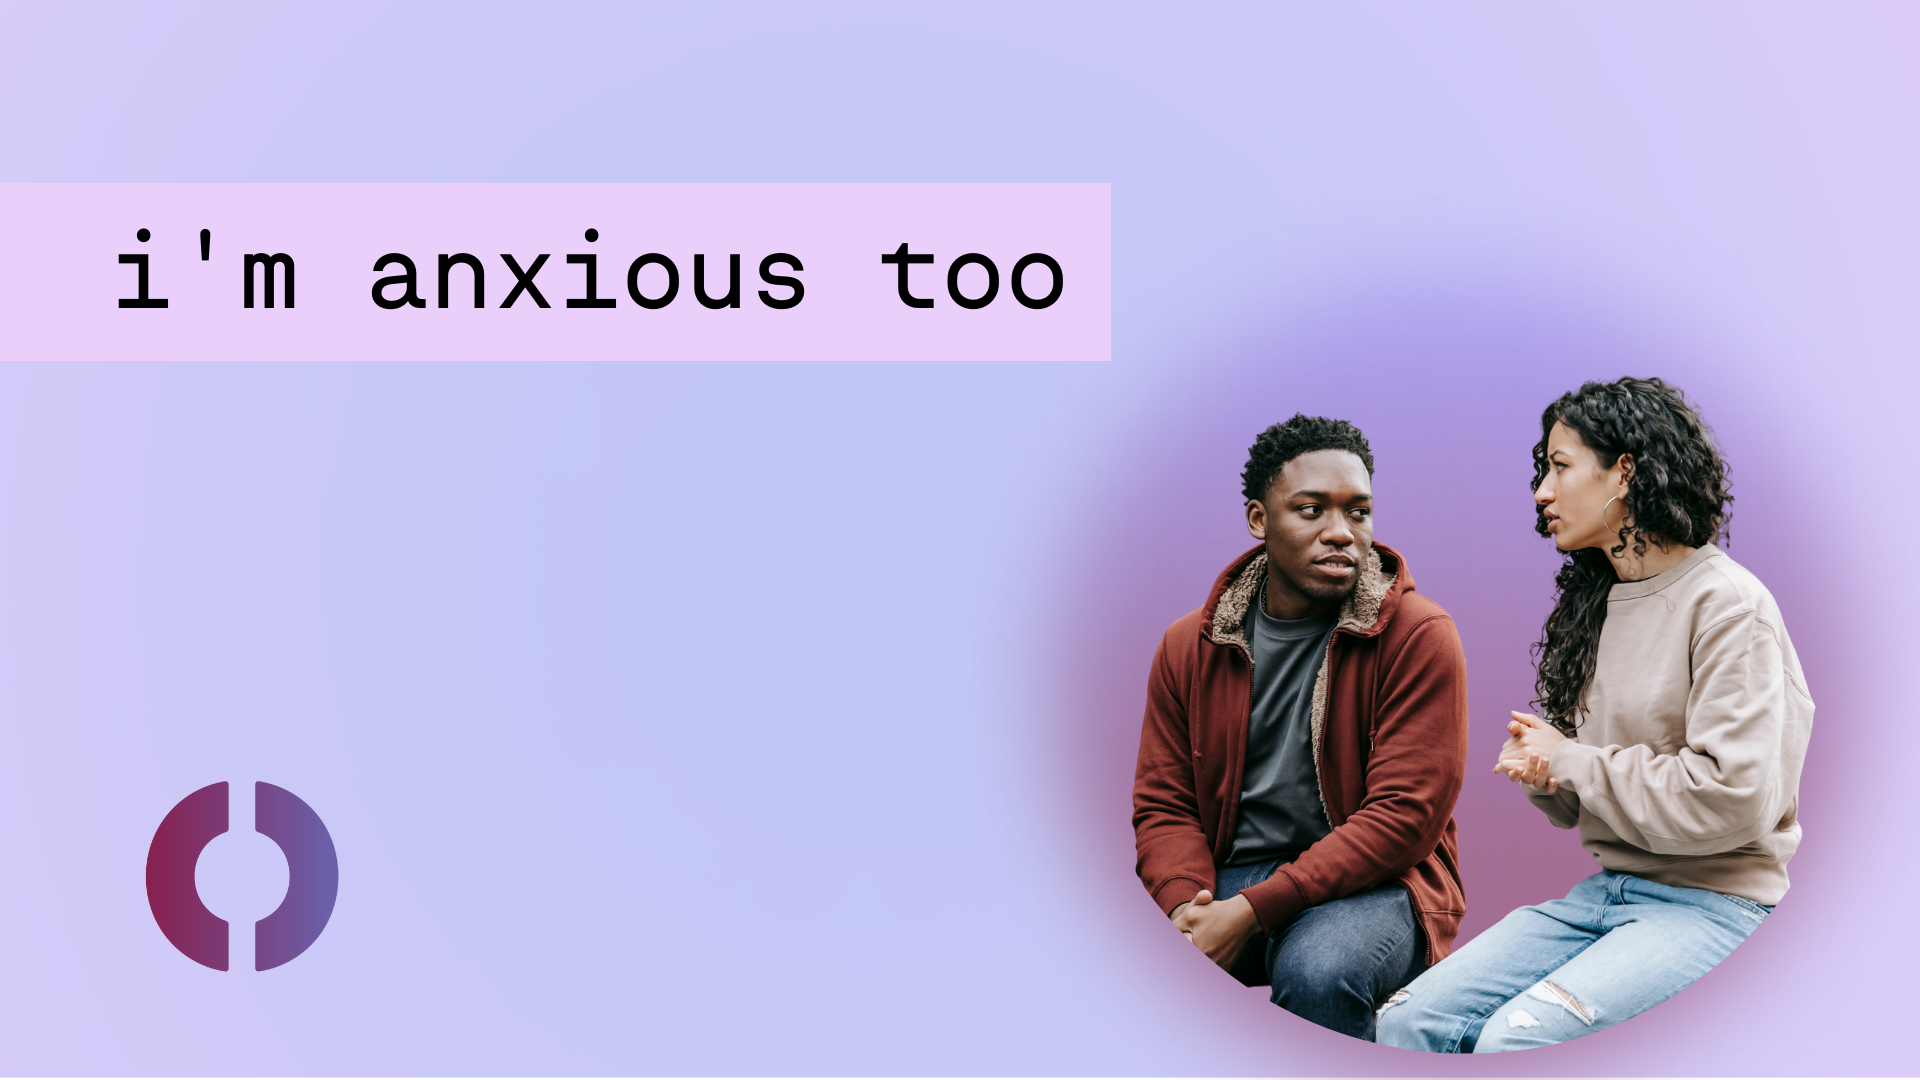 Two young people with assumed closeness having a thoughtful conversation. The two individuals have neutral expressions, with a light purple gradient and text which reads "i'm anxious too."